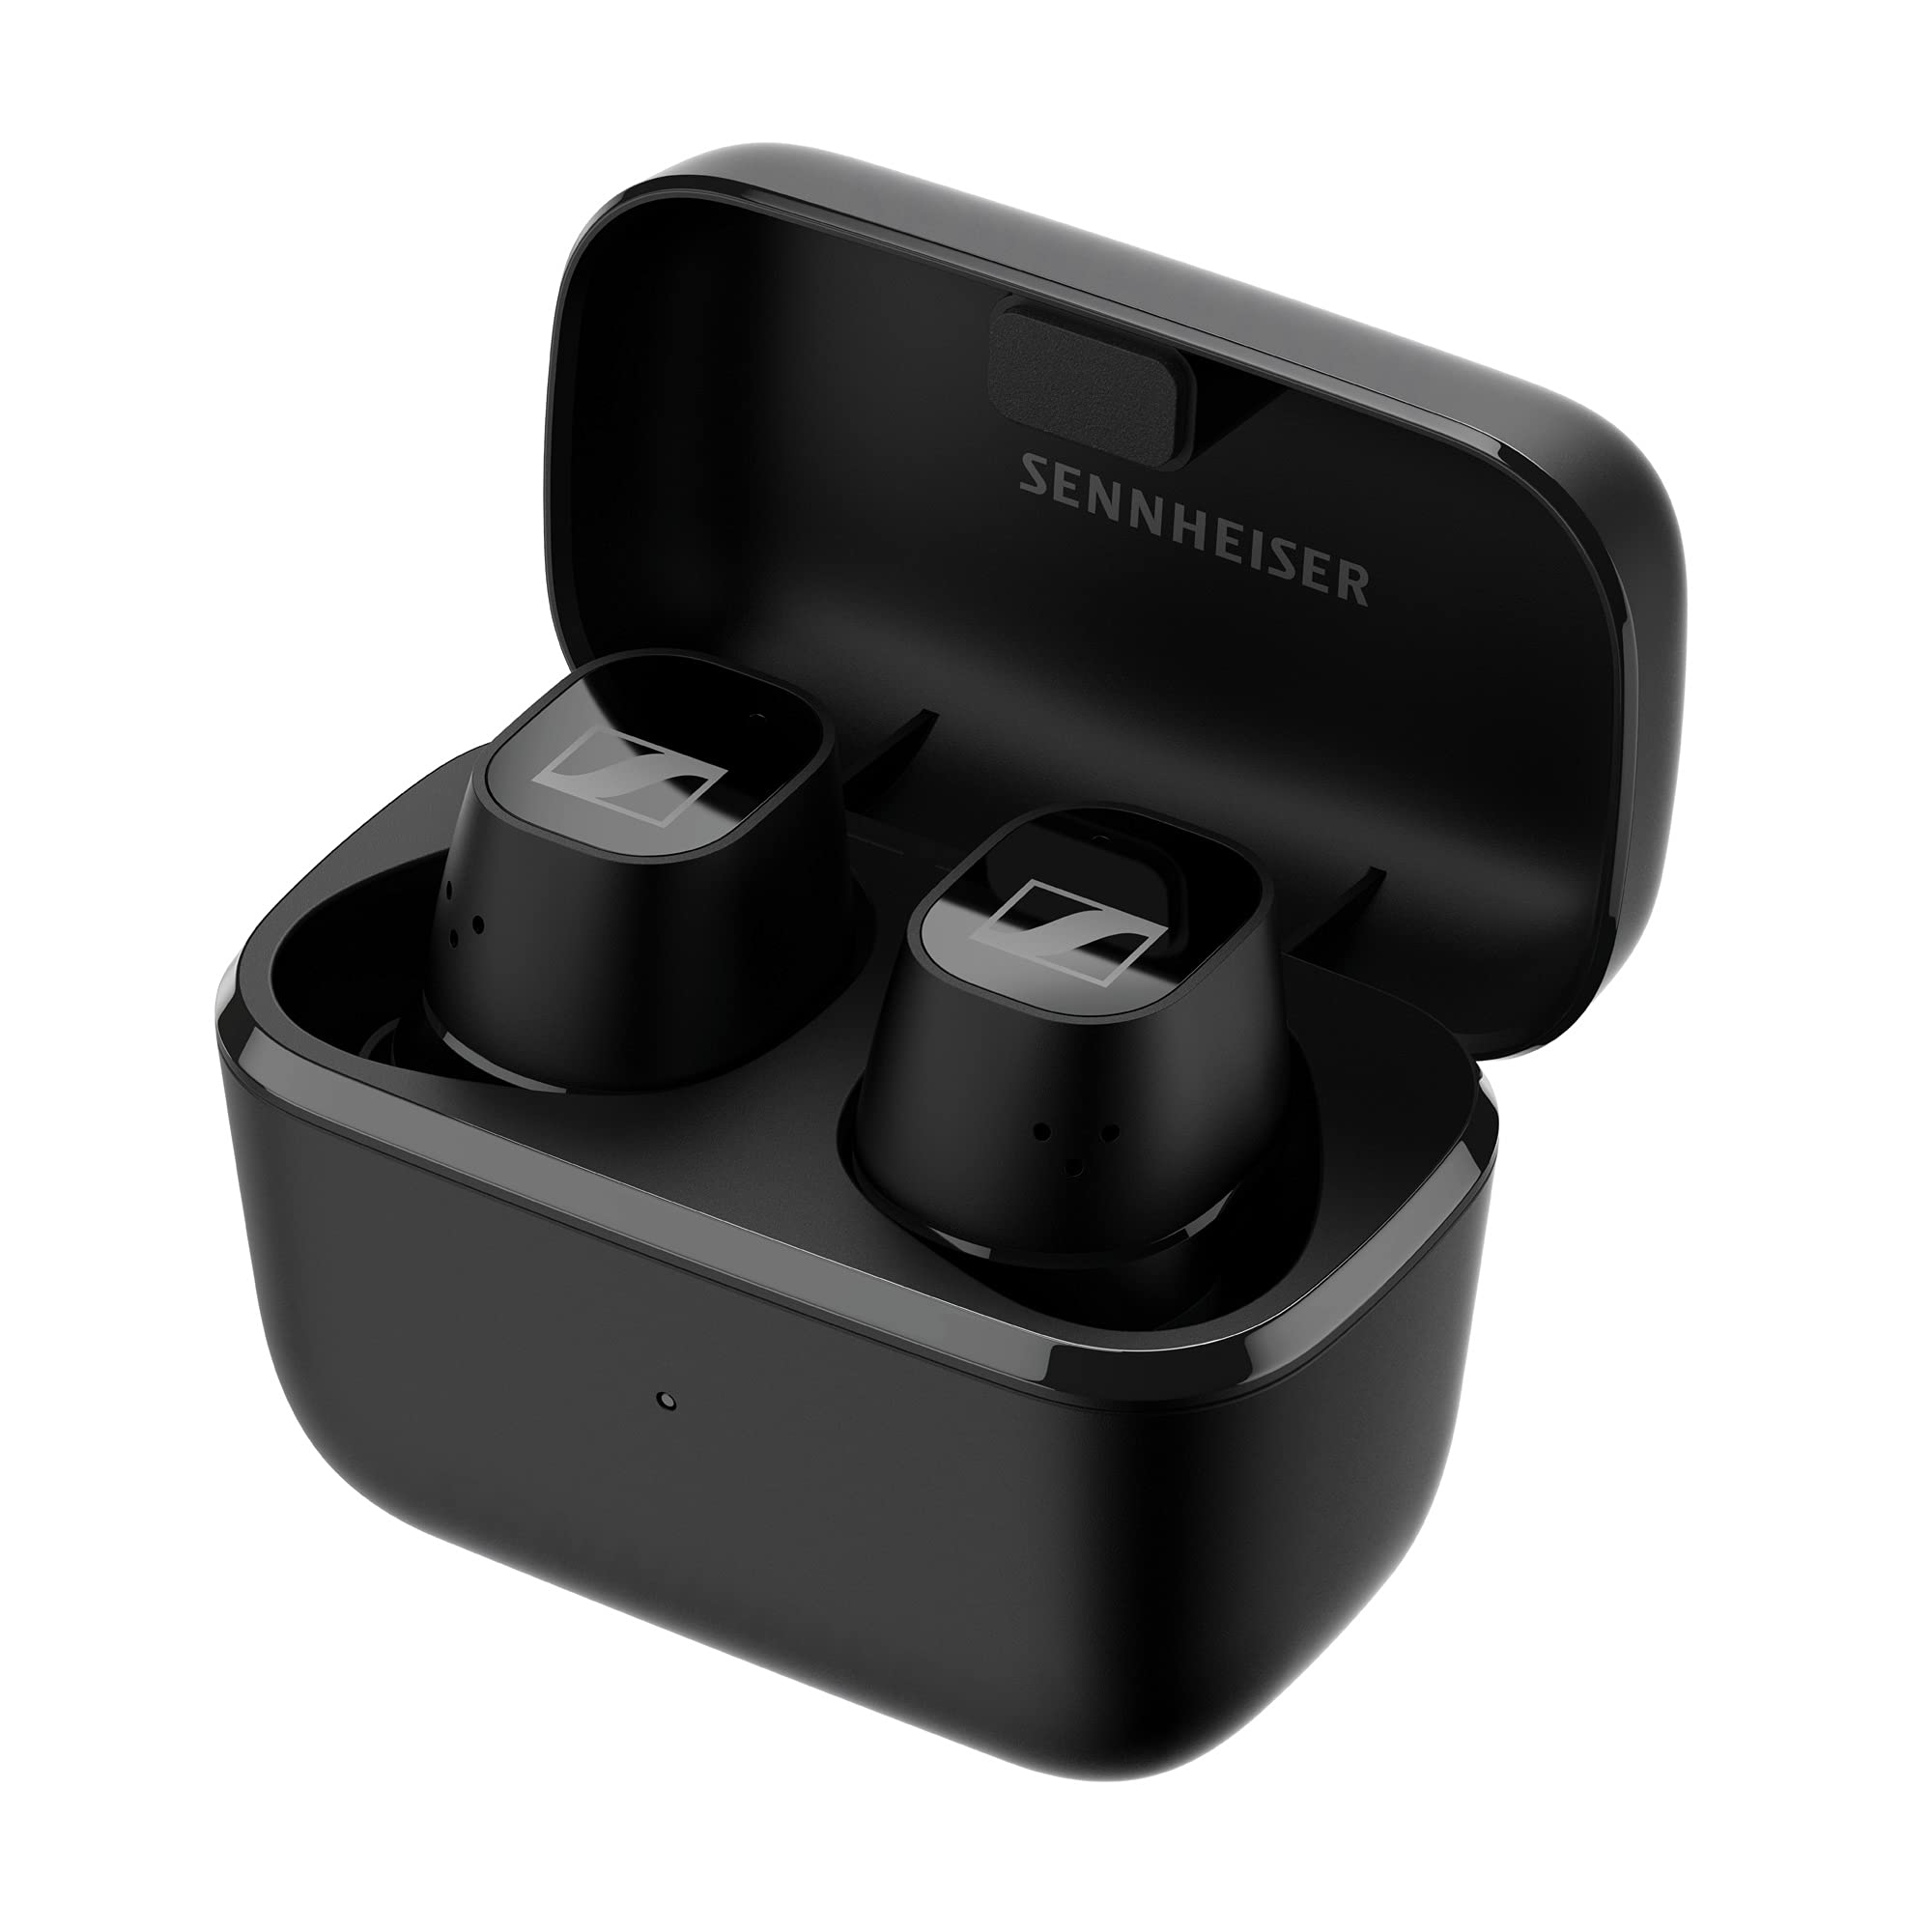  Sennheiser Consumer Audio CX Plus True Wireless Earbuds - Bluetooth In-Ear Headphones for Music and Calls with Active Noise Cancellation, Customizable Touch Controls, IPX4 and 24-hour Battery Life -...